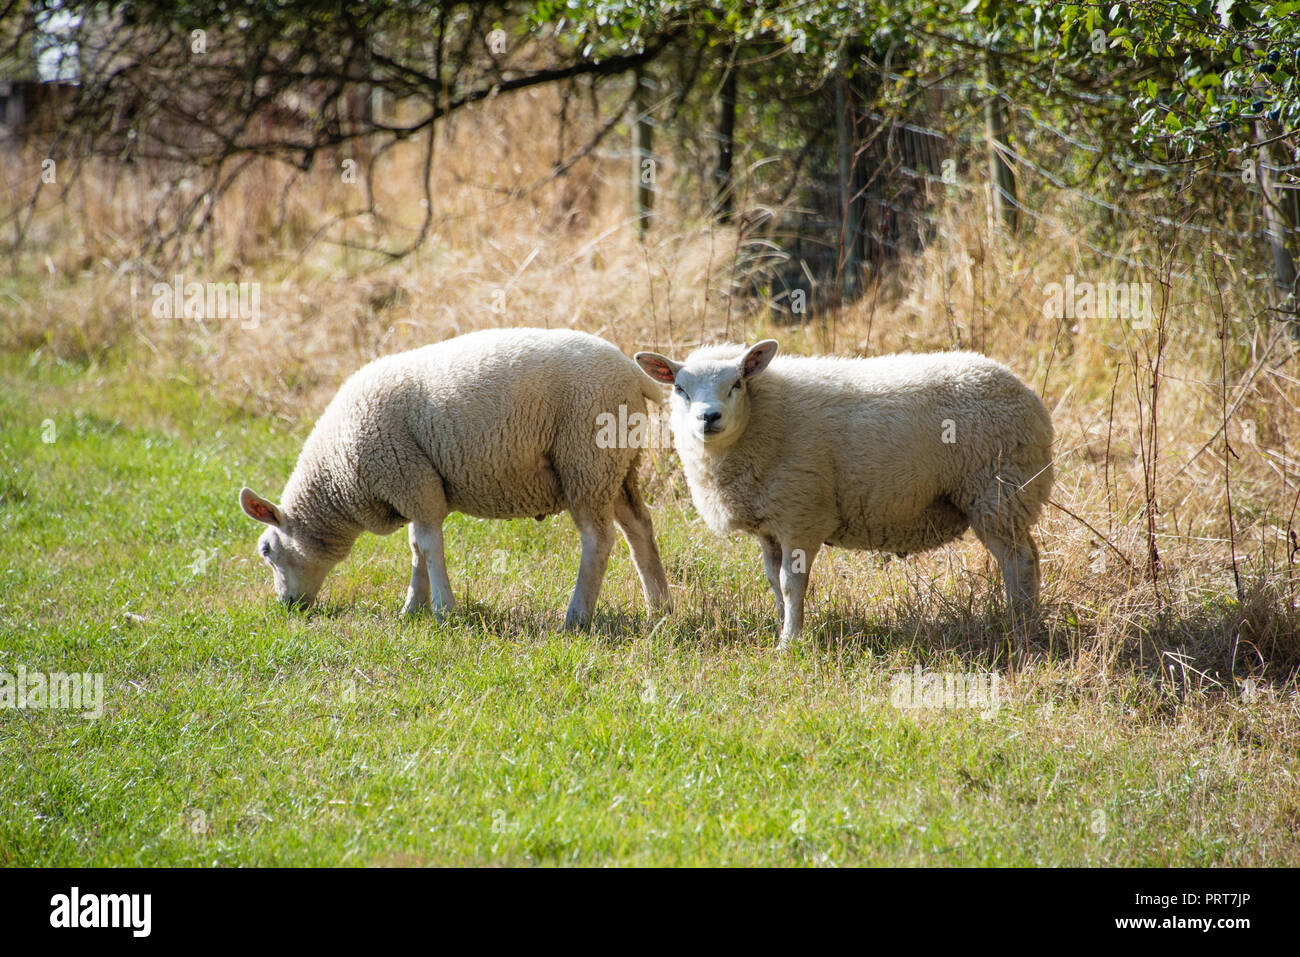 Two wooly sheep ready for shearing, one eating the long green grass and the other interested in the photographer Stock Photo